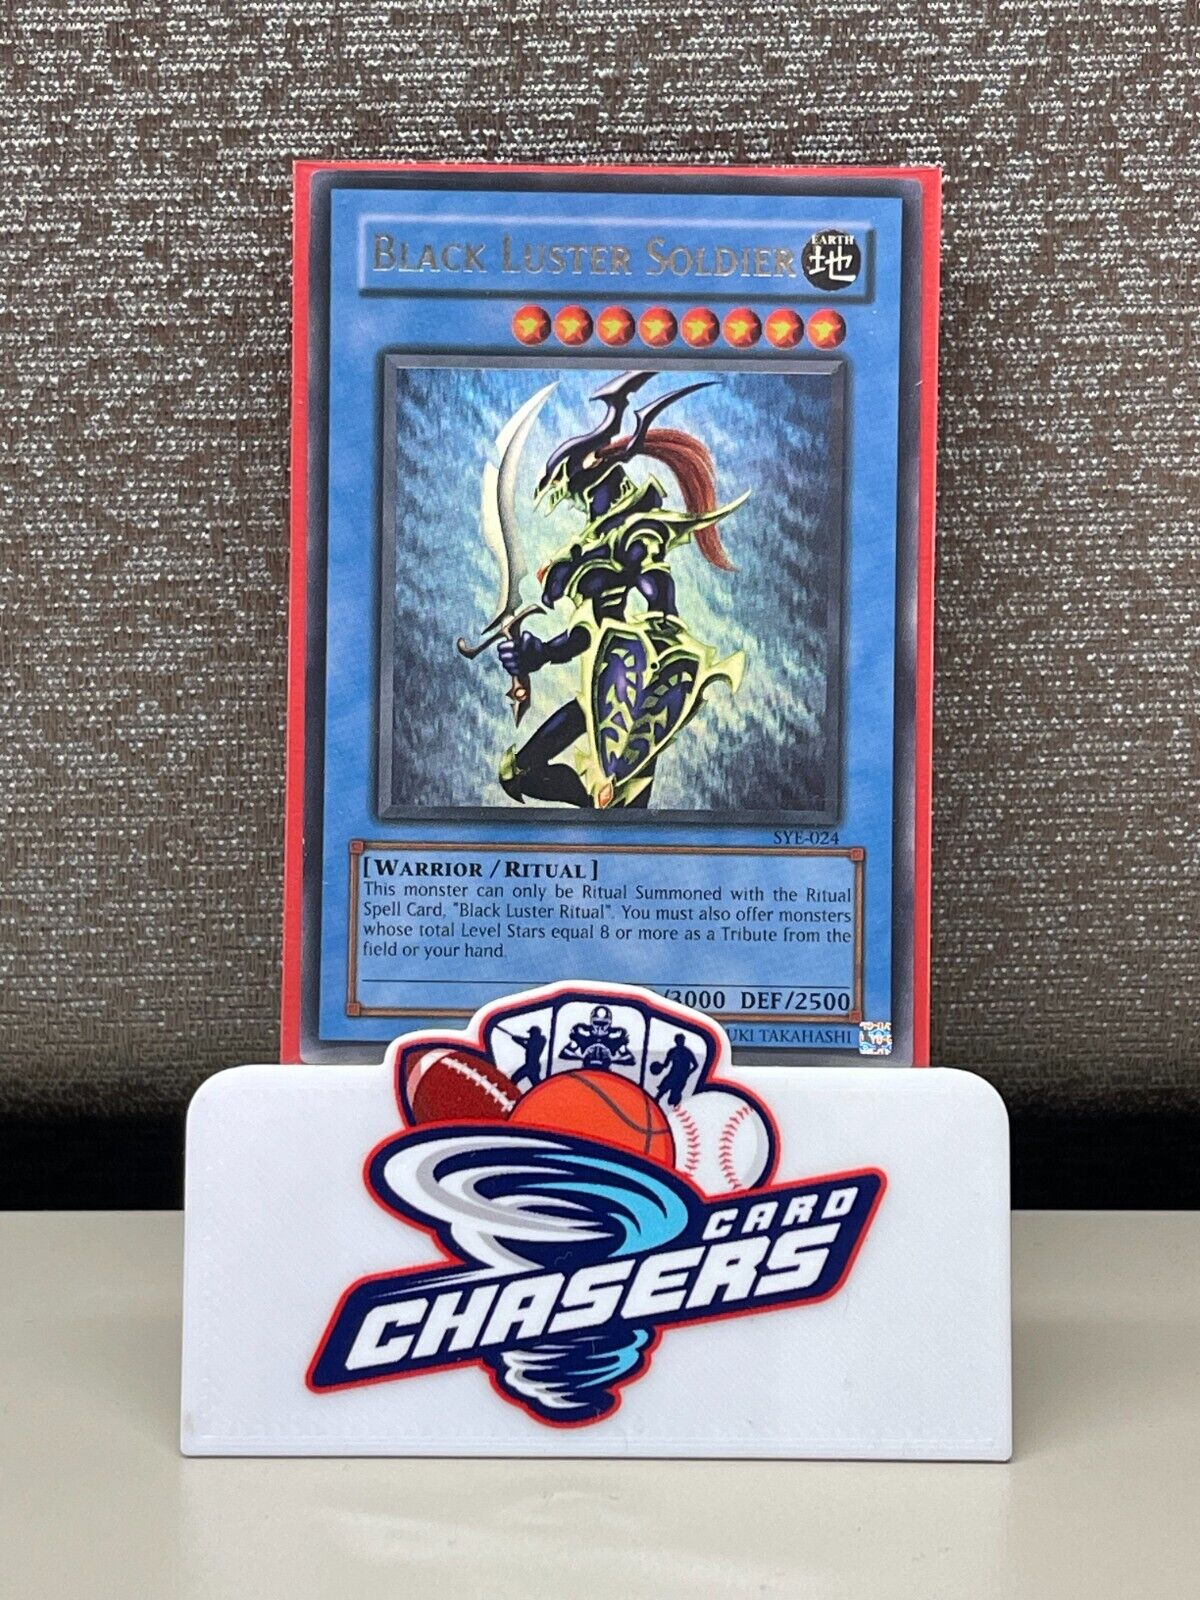 1x (HP) Black Luster Soldier - SYE-024 - Ultra Rare - Unlimited Edition YuGiOh